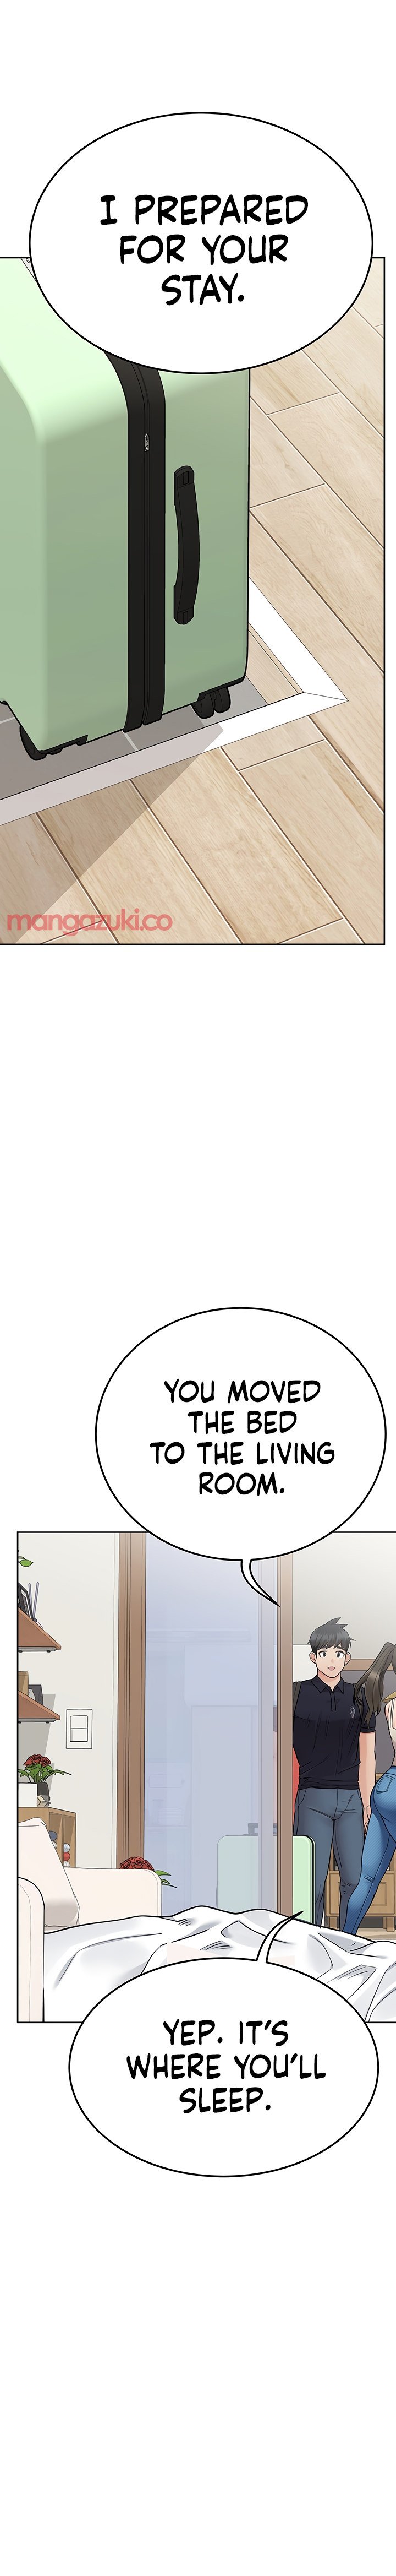 keep-it-a-secret-from-your-mother-001-chap-82-12